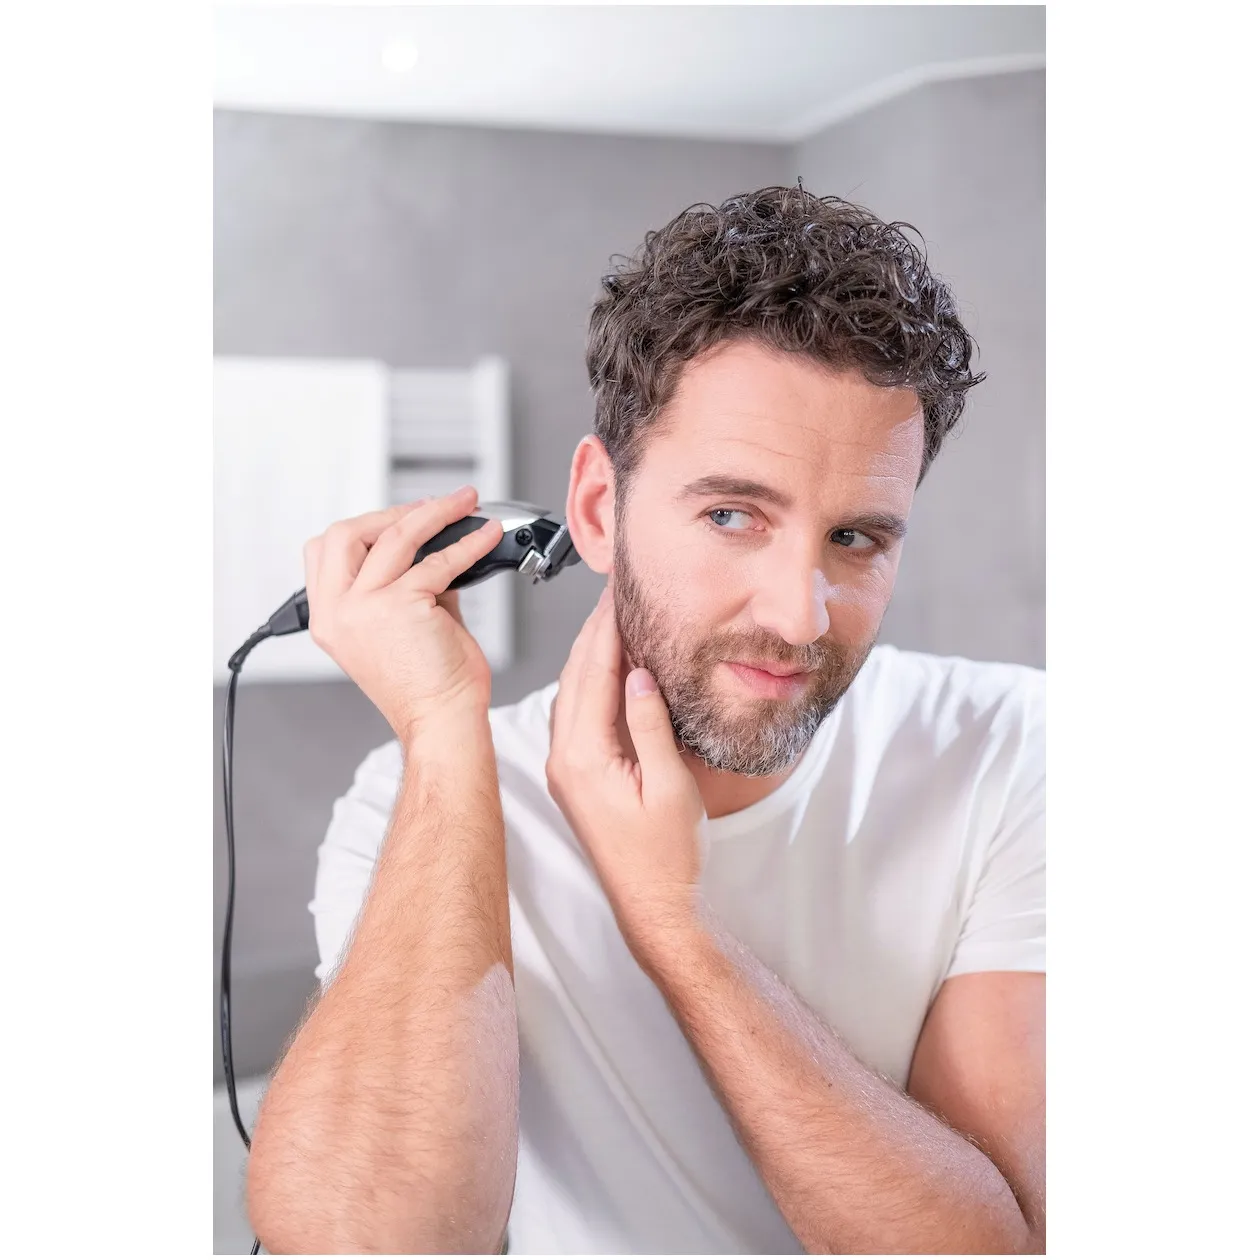 Wahl HOMEPRO CLIPPER 09243-2616